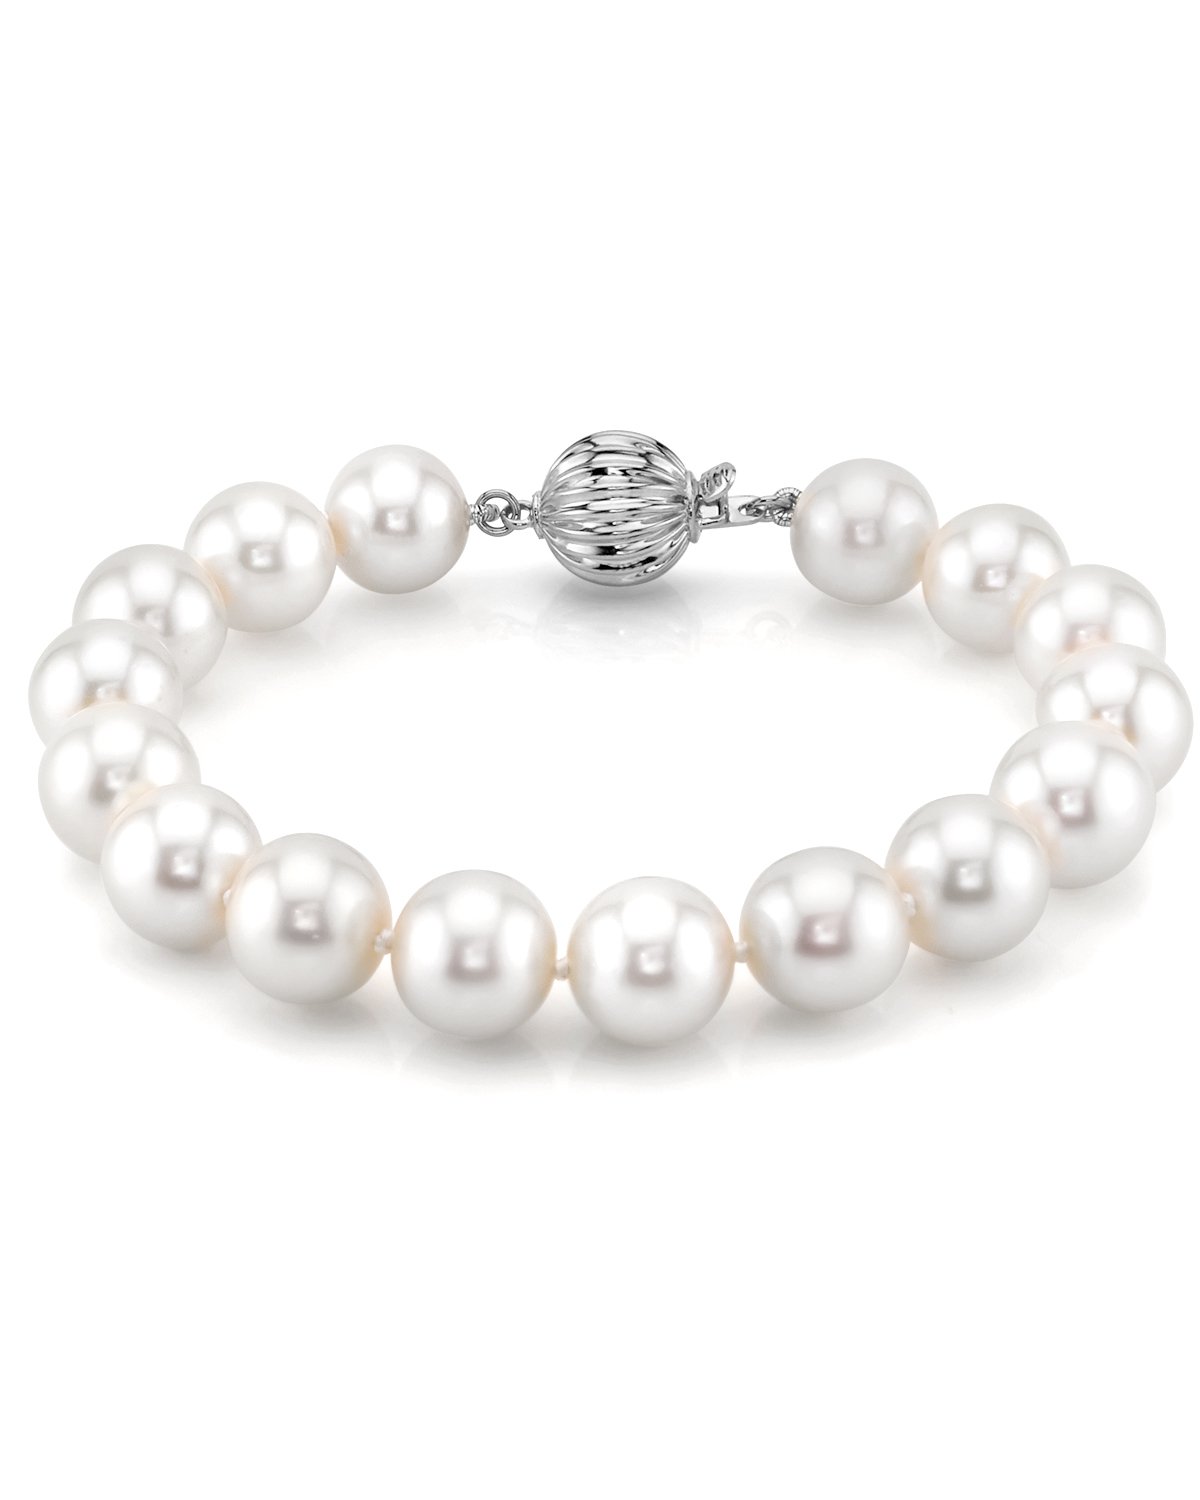 9.5-10.5mm White Freshwater Pearl Bracelet - AAA Quality - Pure Pearls